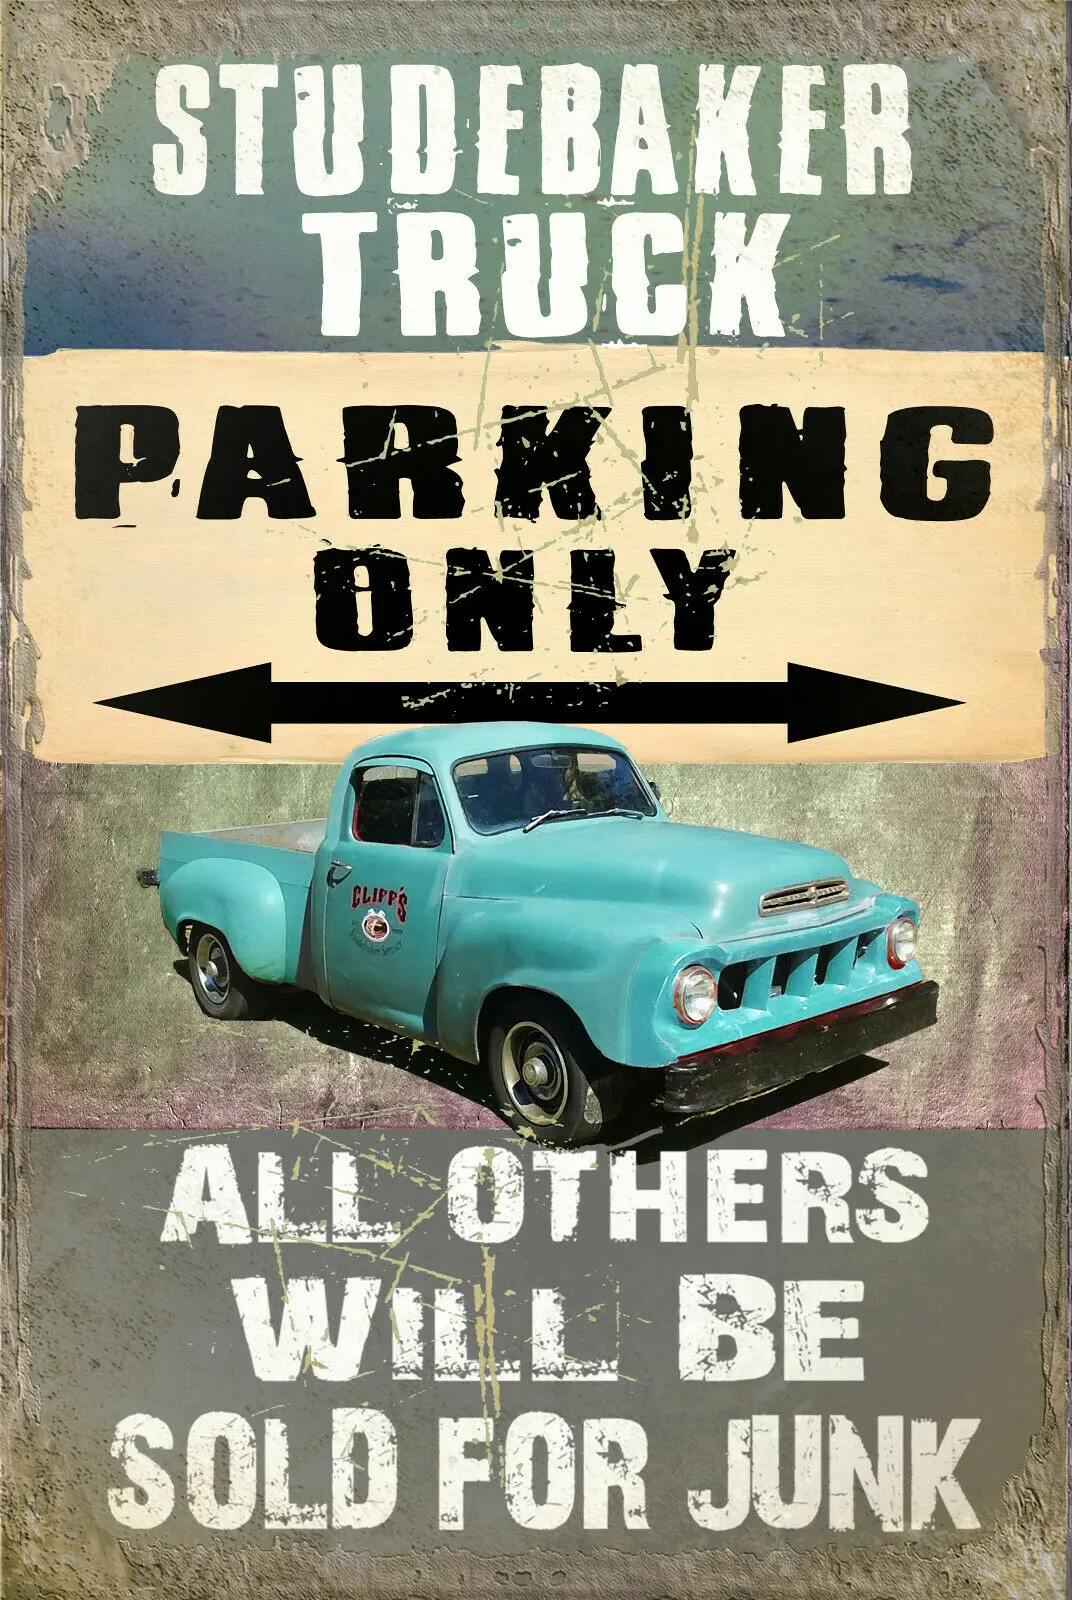 

Truck Parking Space Only Metal Tin Signage Old-fashioned Parking Lot Fashion Garage Wall Sticker Decorative Plaque 8x12 Inches